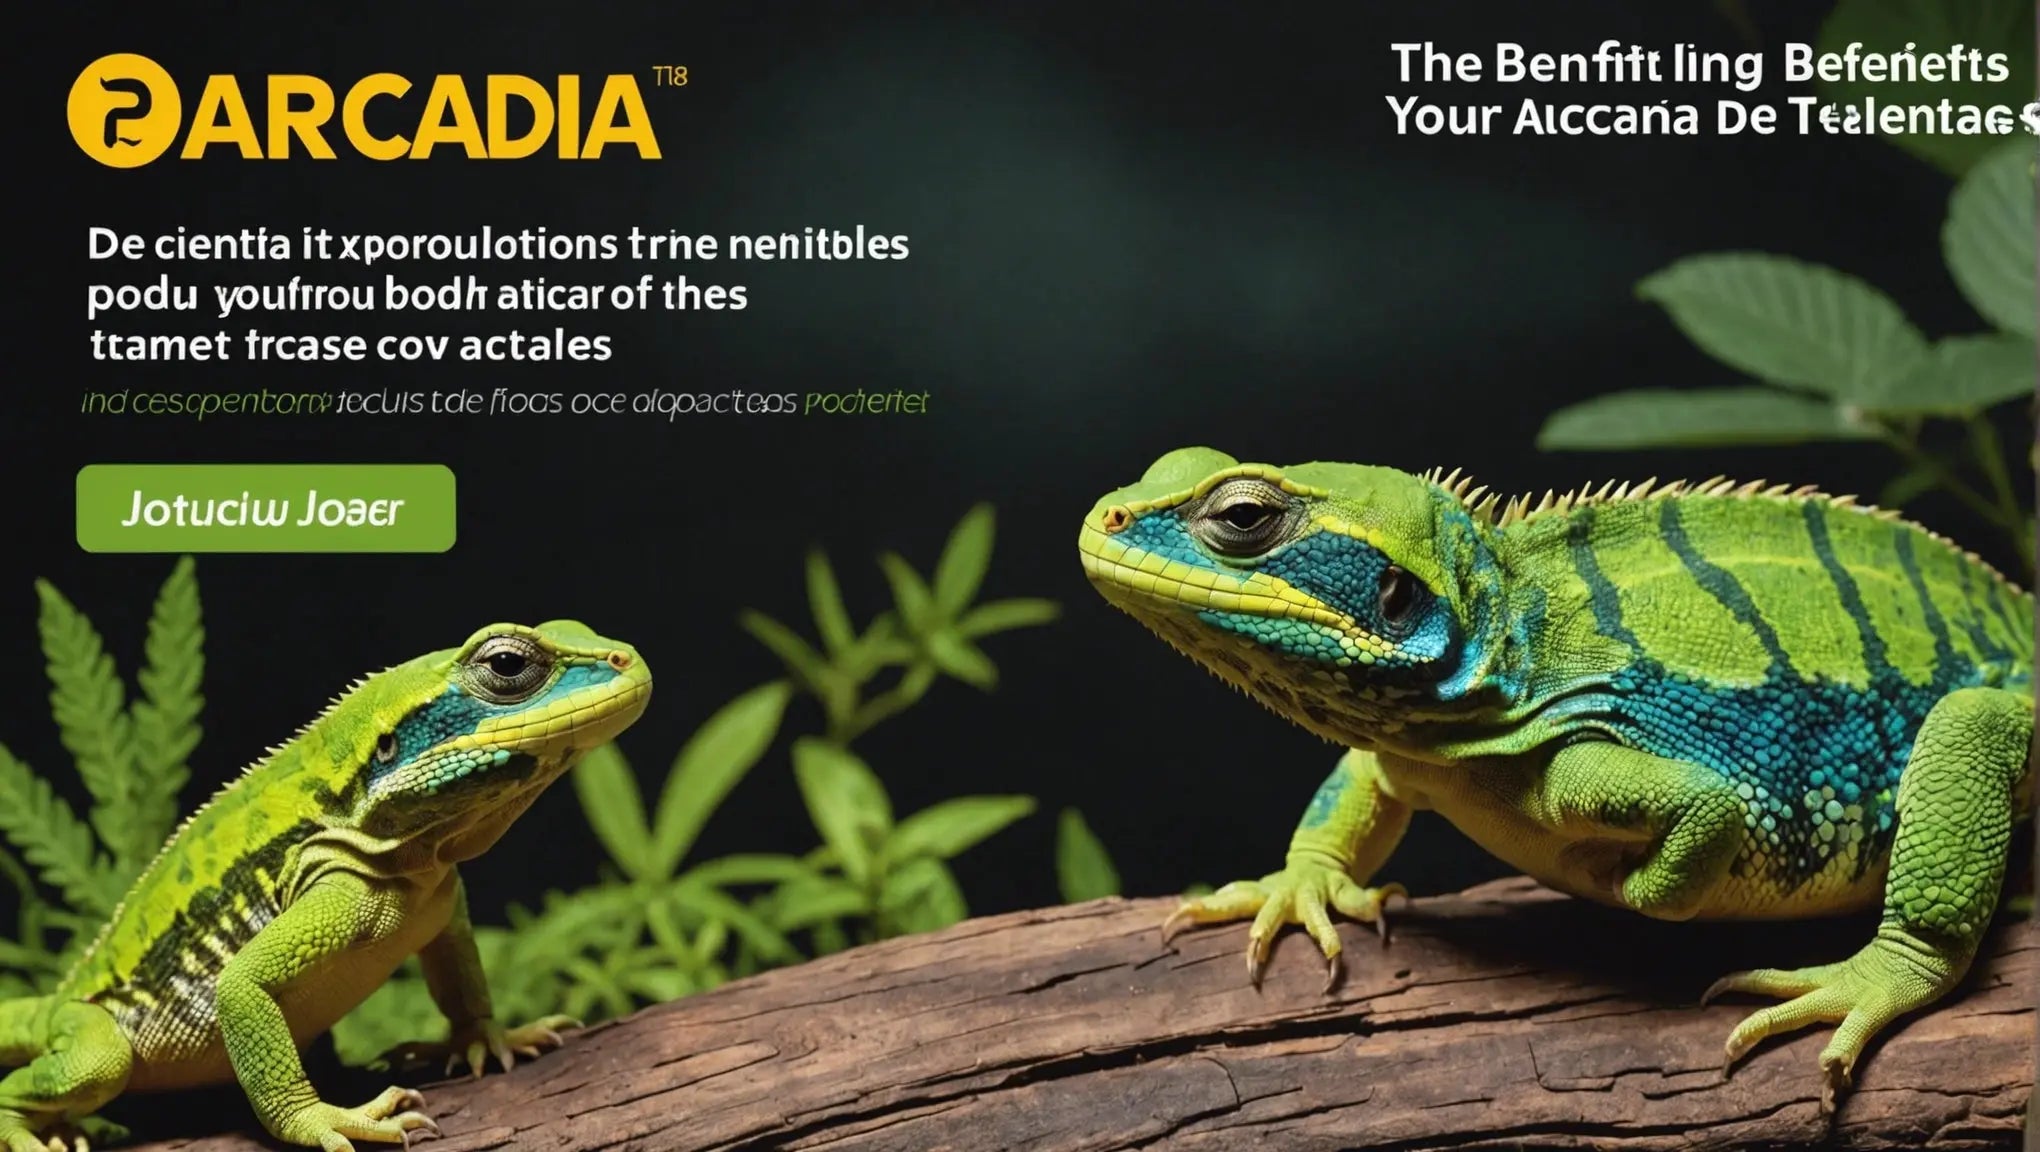 The Benefits of Using Arcadia T8 UVB for Your Reptiles